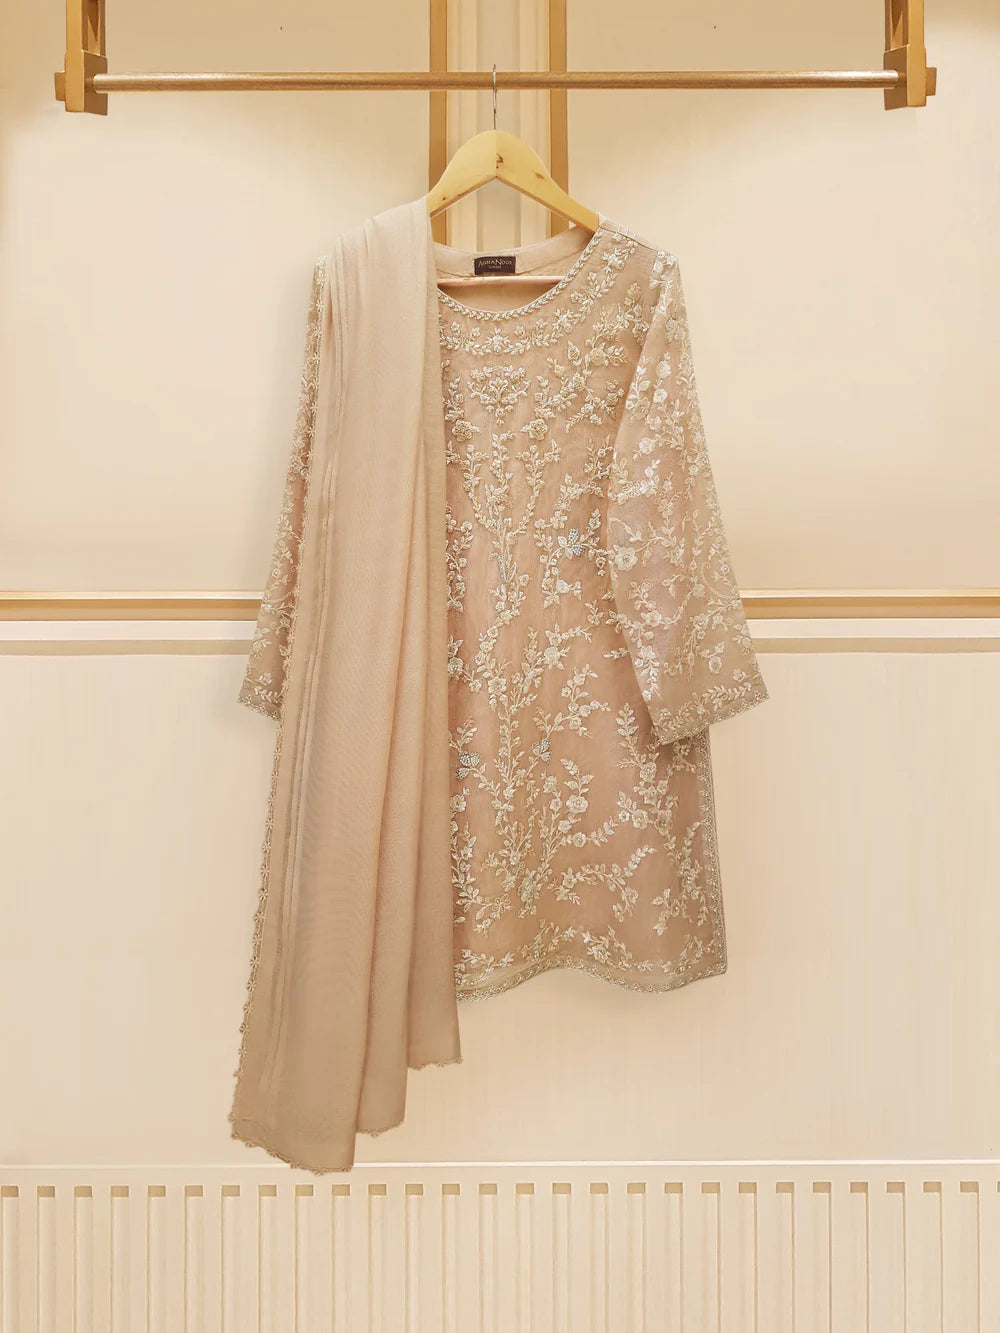 3 PIECE - PURE COTTON NET EMBROIDERED SUIT S108866